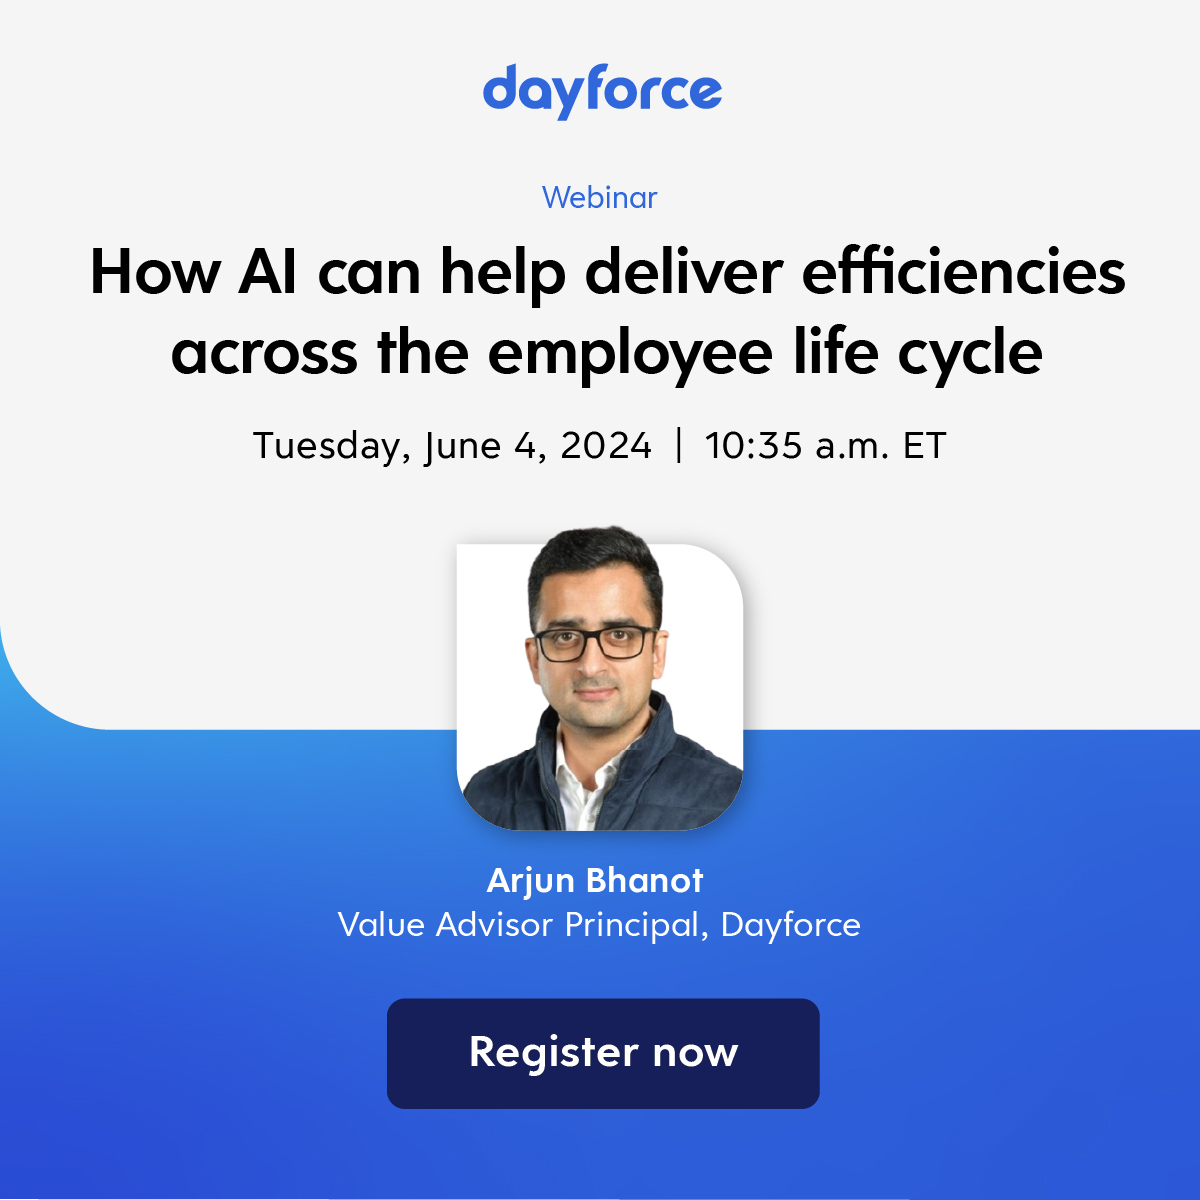 Discover how AI can transform every stage of the employee life cycle, from recruitment to retirement. Don’t miss out on Arjun Bhanot’s Tech Talk at @HRD_Canada's HR Tech Summit on June 4. Register here: hrtechsummit.com